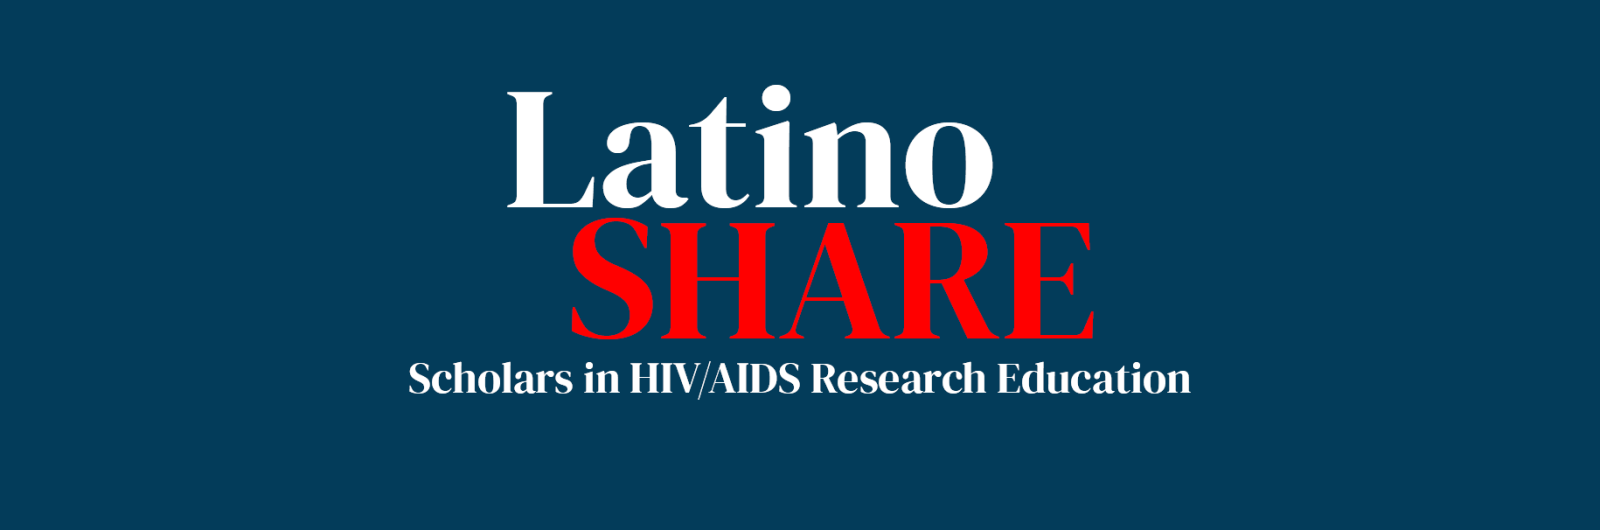 Latino SHARE (red) Scholars in HIV/AIDS Research Education